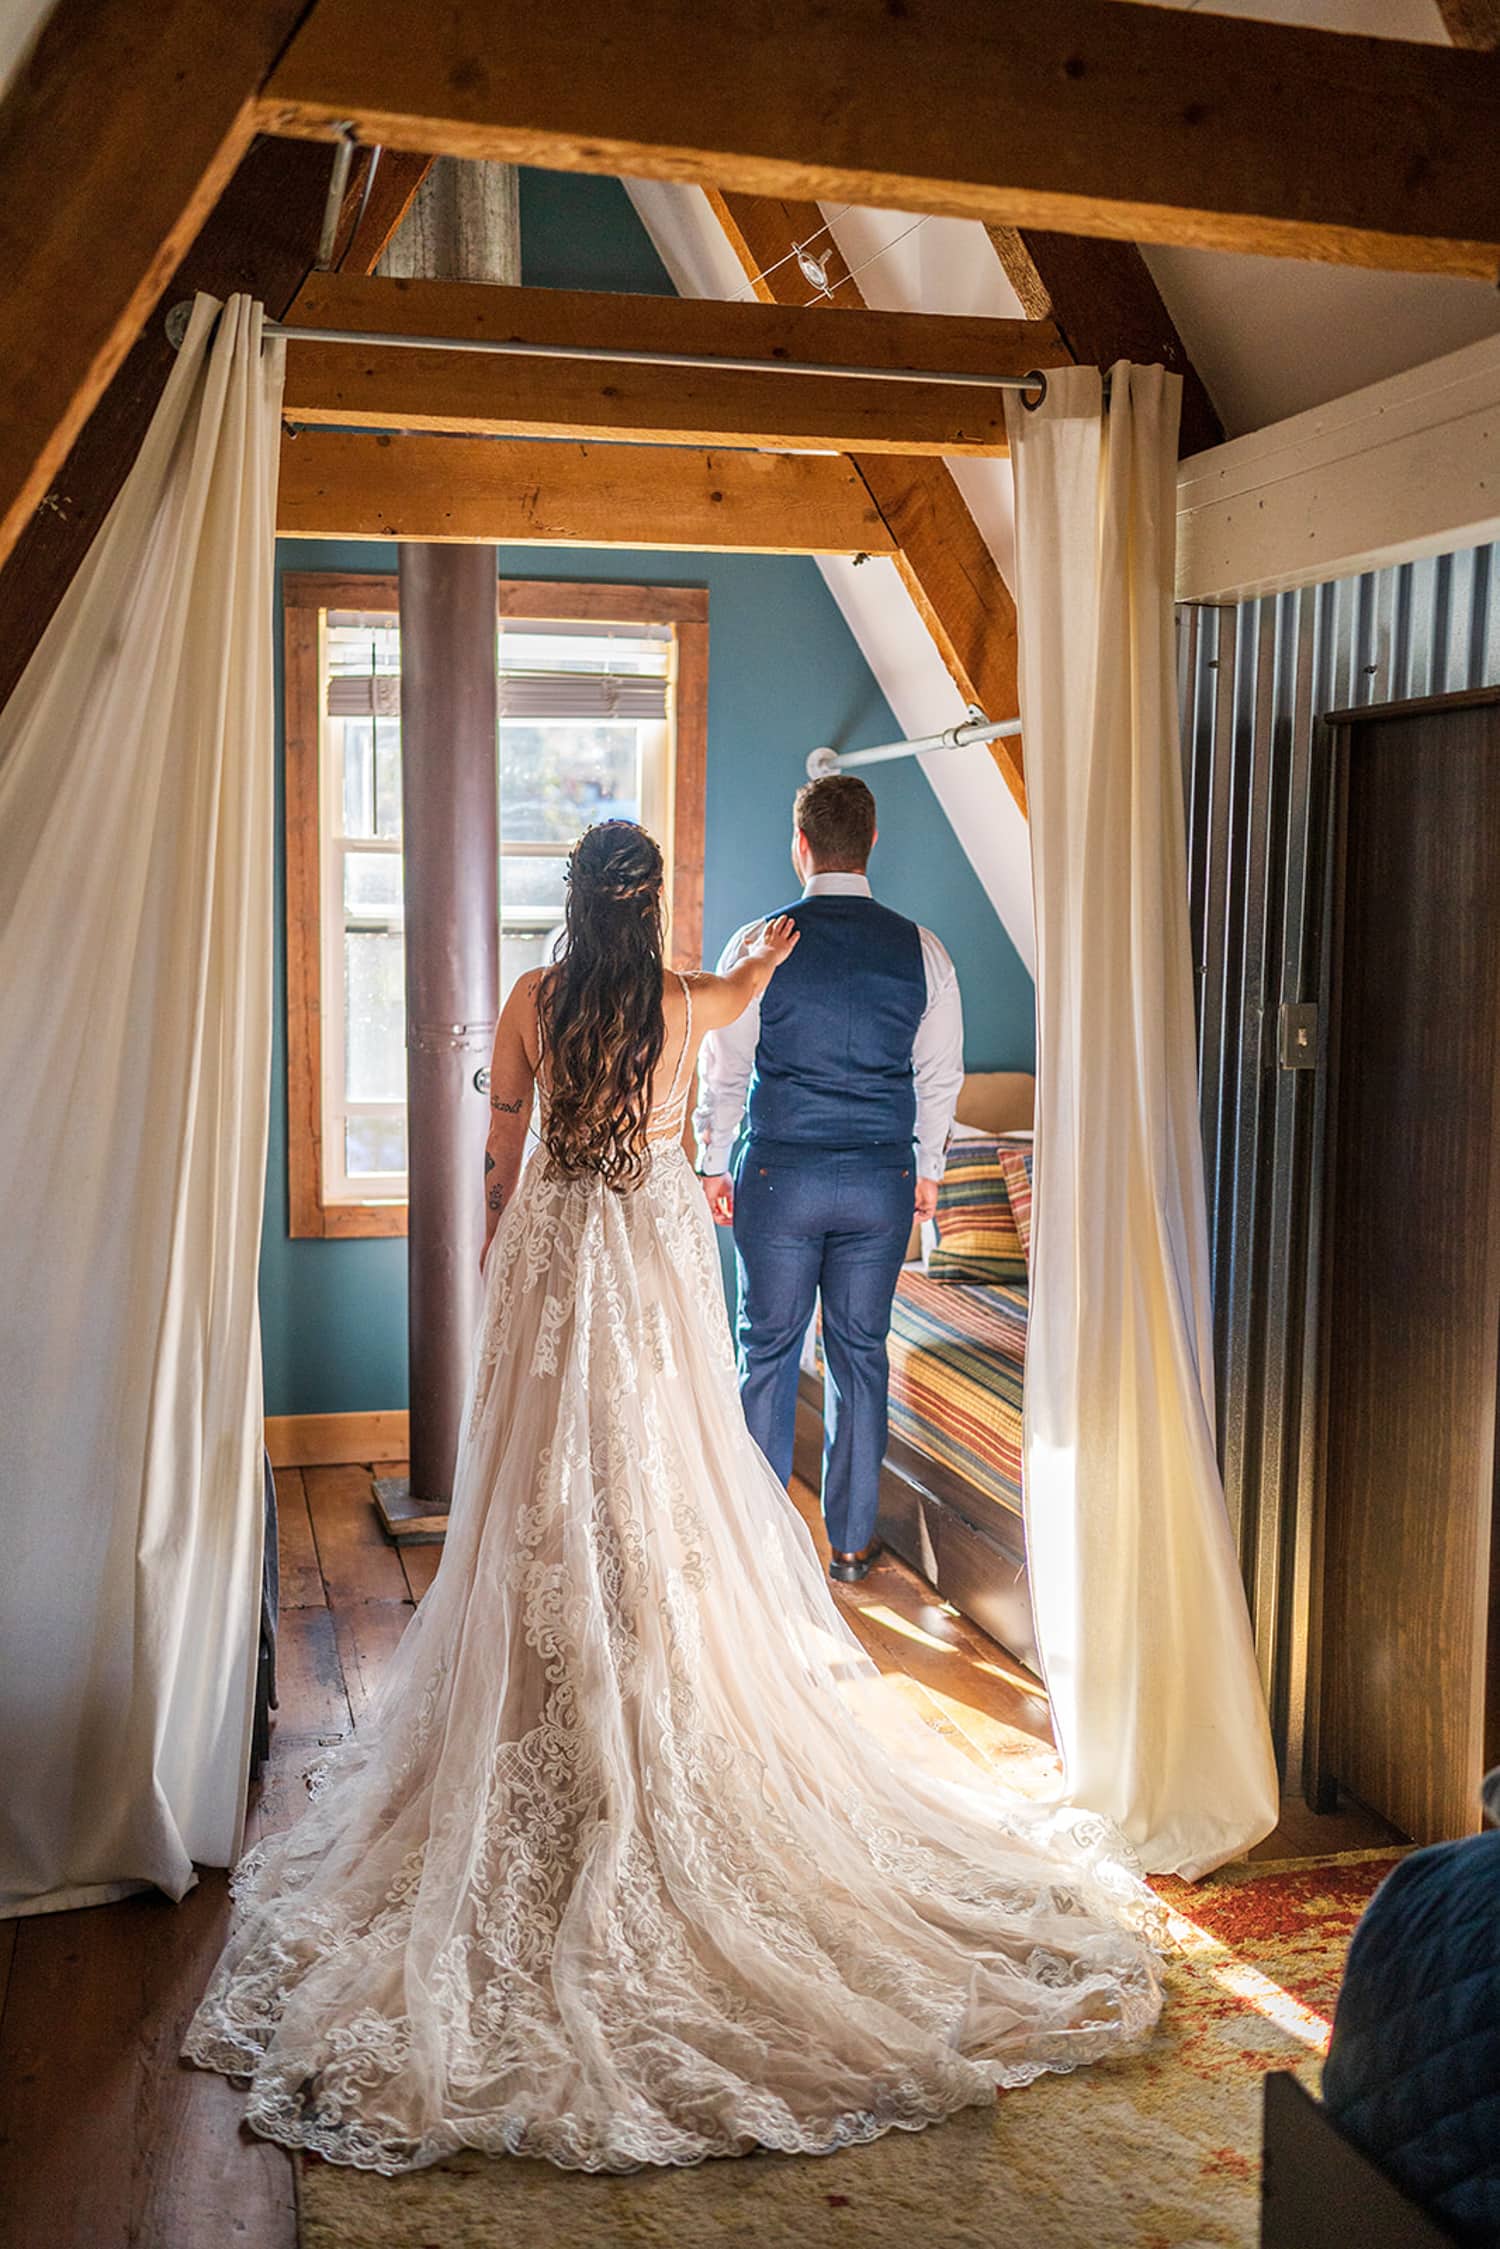 Bride and groom sharing first look at their airbnb elopement.